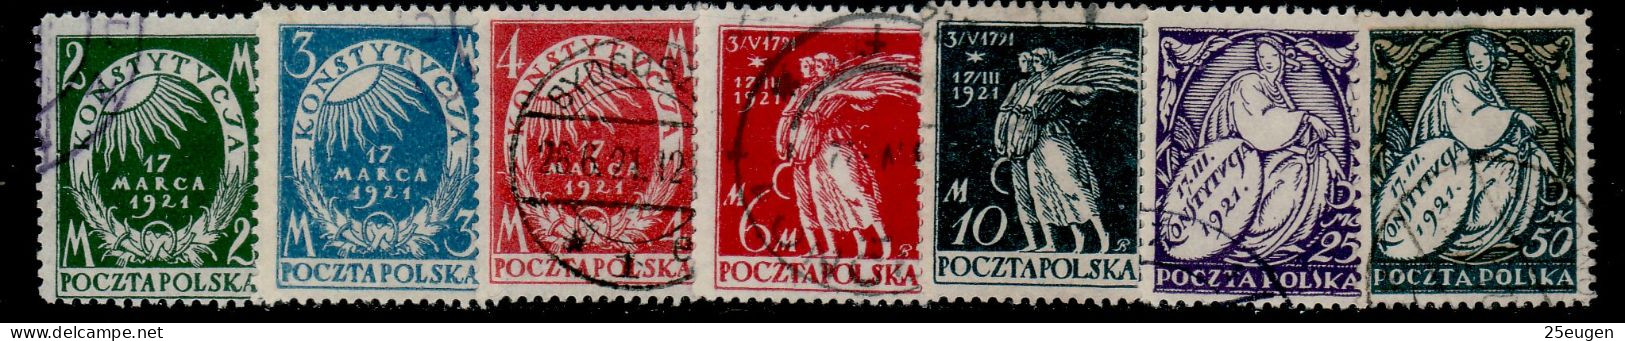 POLAND 1921 MICHEL NO: 164-170 USED - Used Stamps